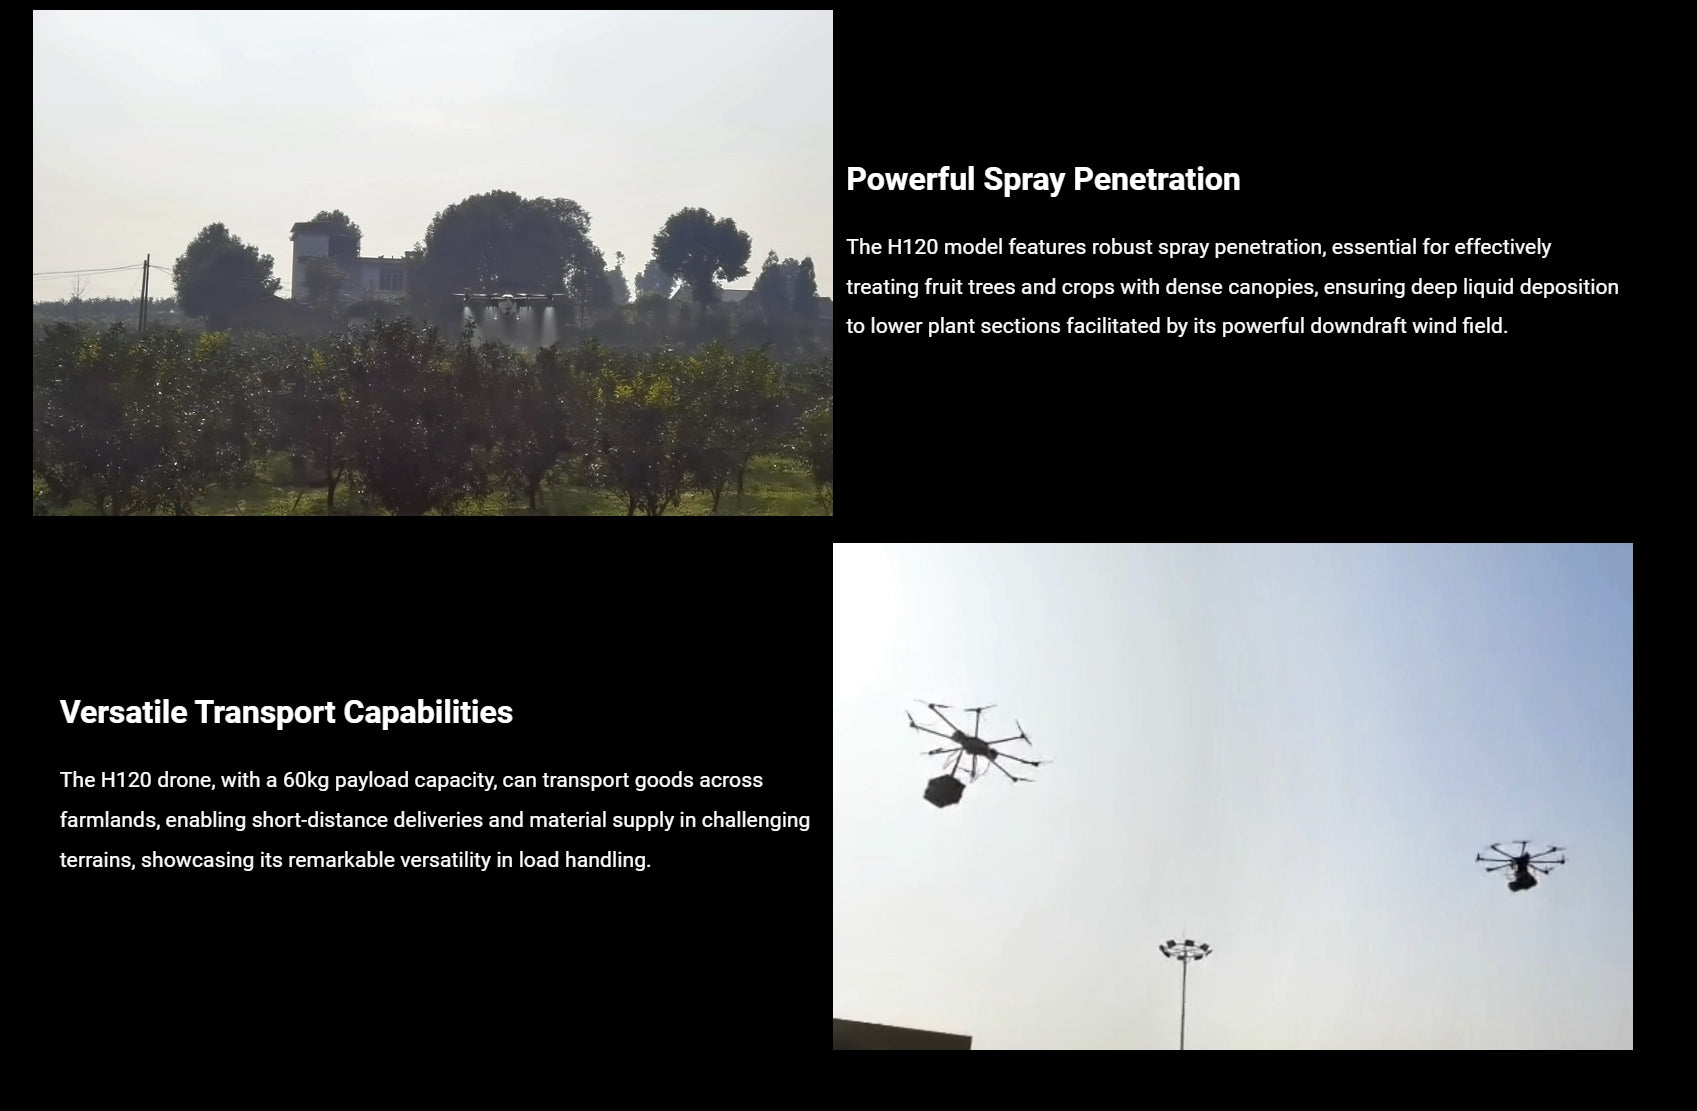 H120 Agriculture Drone, powerful spray penetration essential for treating fruit trees and crops . powerful downdraft wind field 